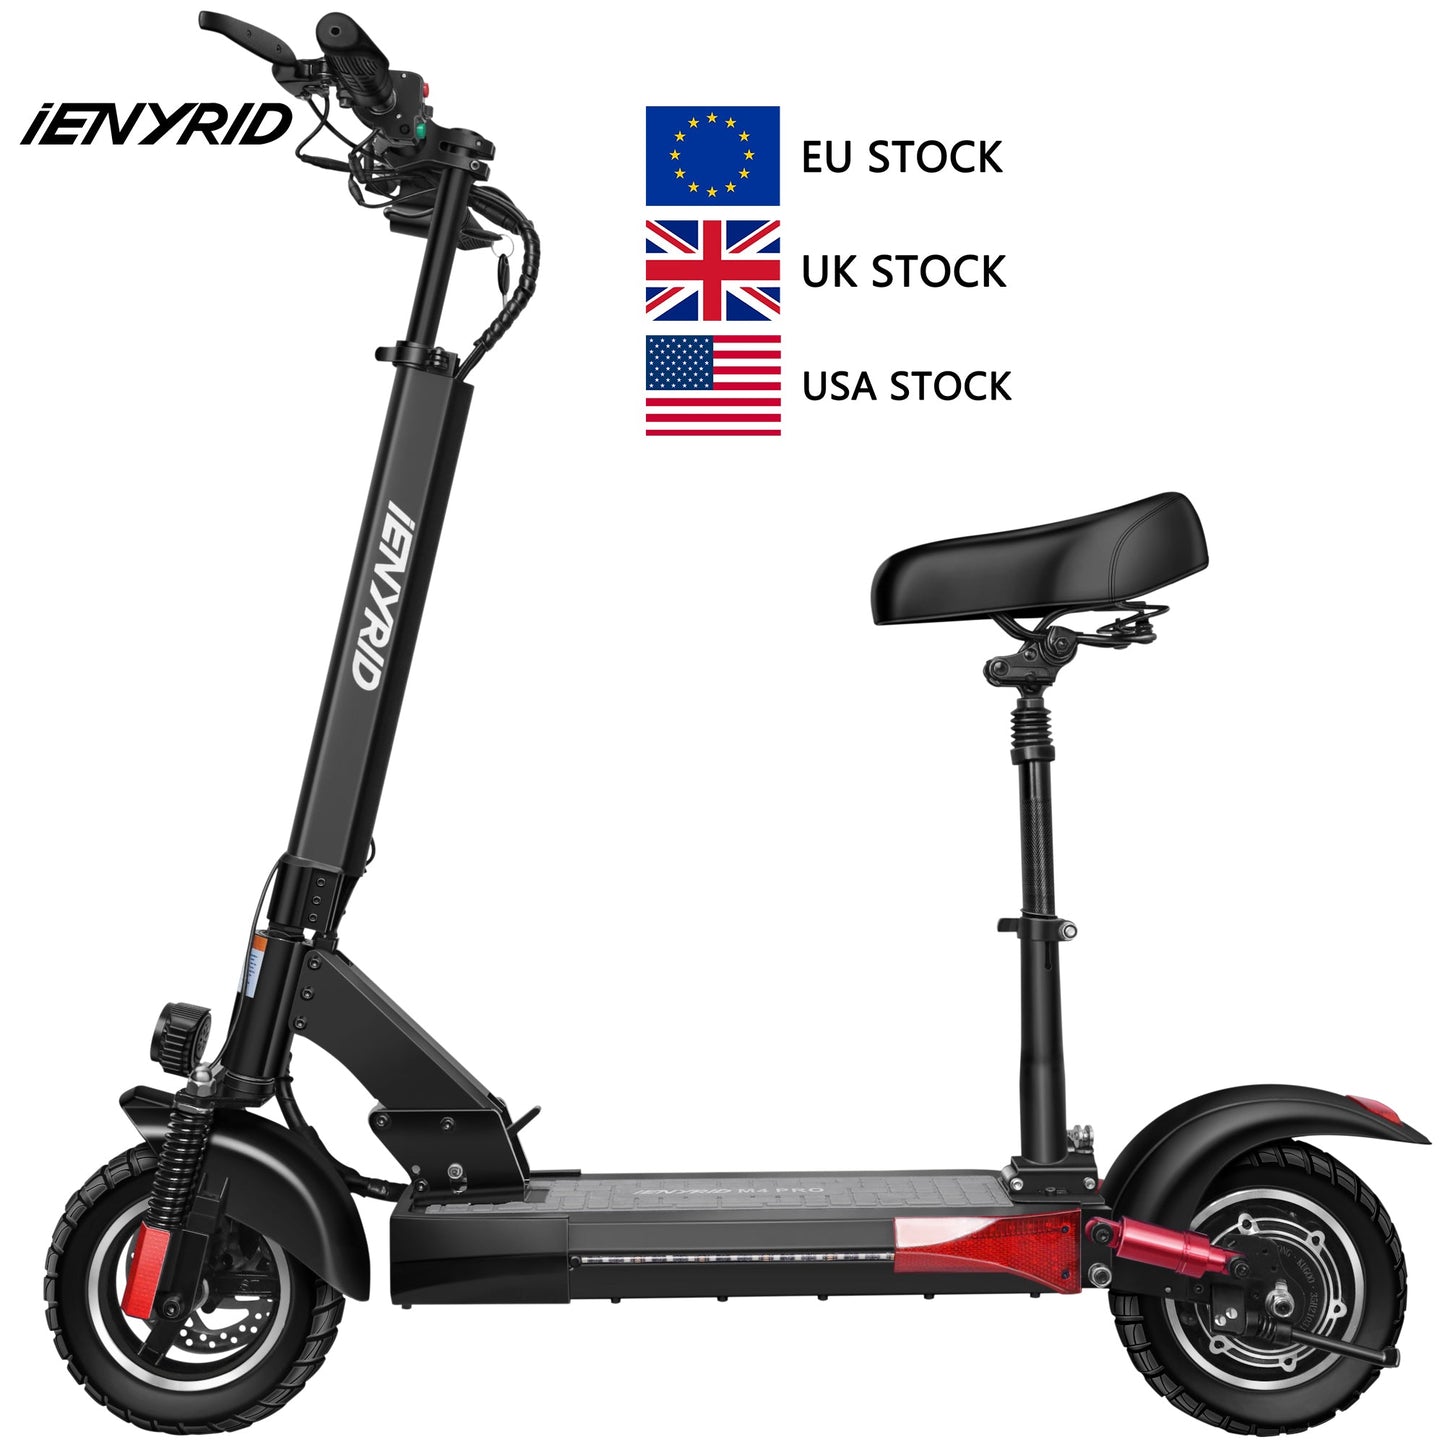 Ready to ship electric scooter usa uk eu stock iE kugoo M4 Pro 500watts Electric Scooter Max Speed 45 km/h kick electric scooter baby magazin 